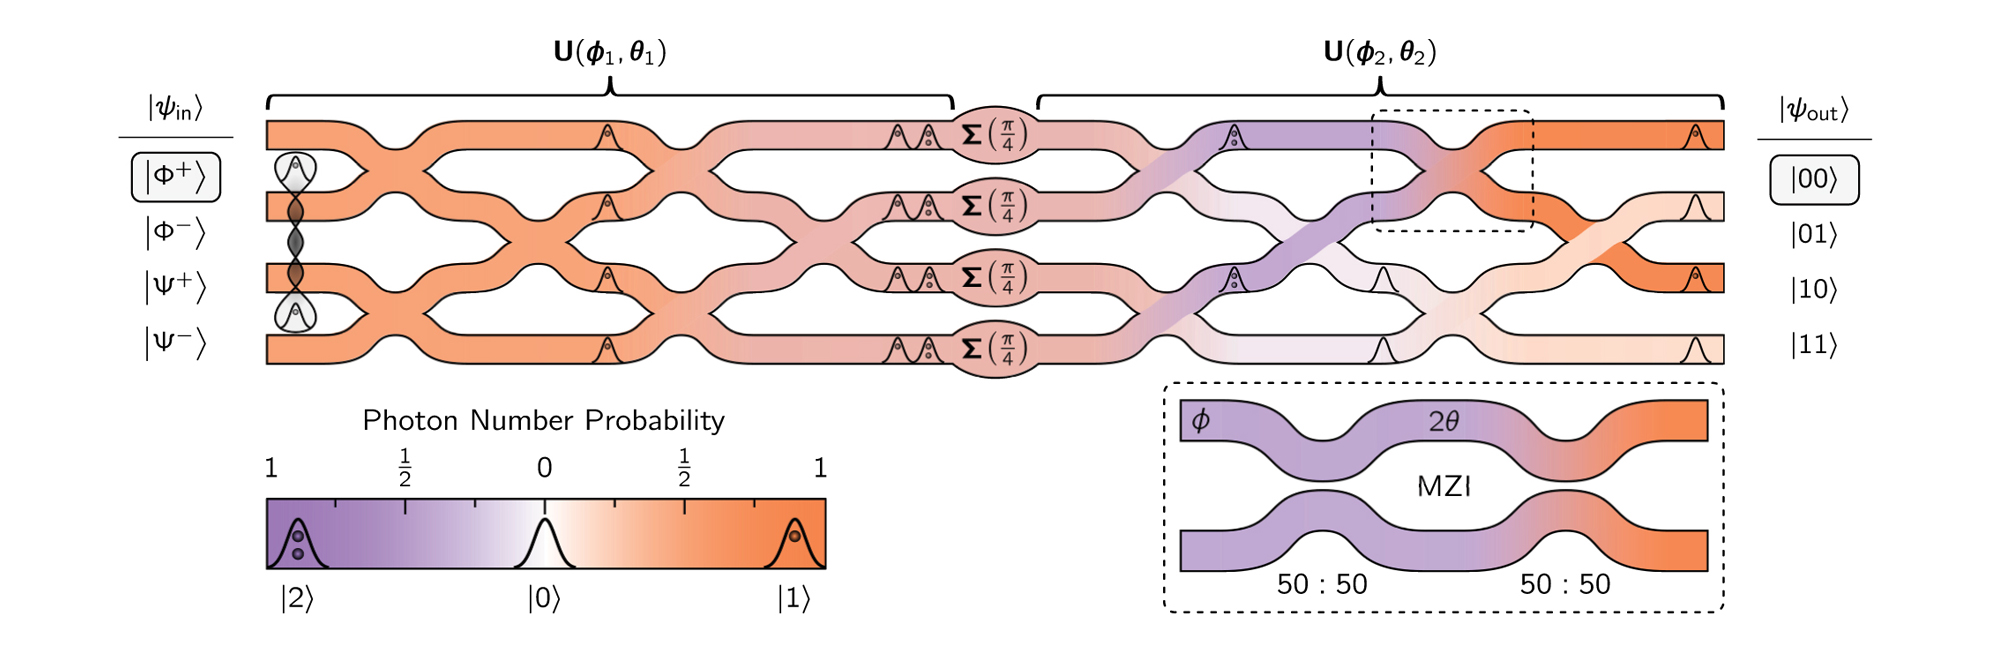 An imperfect quantum photonic neural network-based Bell-state analyzer with fabrication imperfections modelled after state-of-the-art silicon-on-insulator photonic elements (U, inset) and weak optical Kerr nonlinearities (Σ(π/4)). The network is trained to perform the input-output mapping of the Bell-state analyzer (see truth table) in the presence of all component-by-component errors, and thus learns to both overcome fabrication imperfections and get the most out of the available nonlinearities. The network is coloured to demonstrate the propagation of the single and two-photon-per-mode components when the first input of the truth table is incident. 